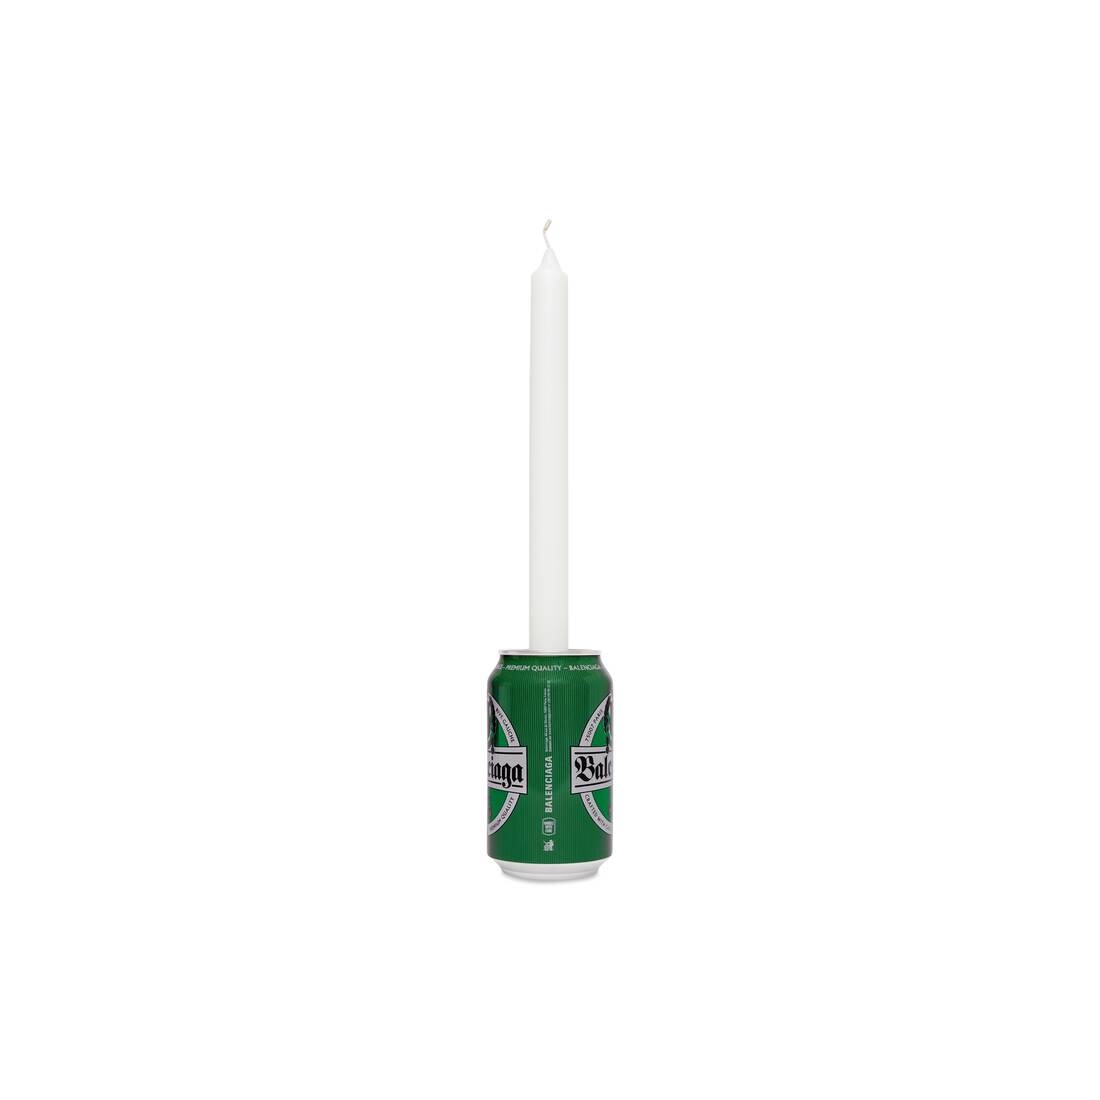 Drink Candle Holder in Green - 3